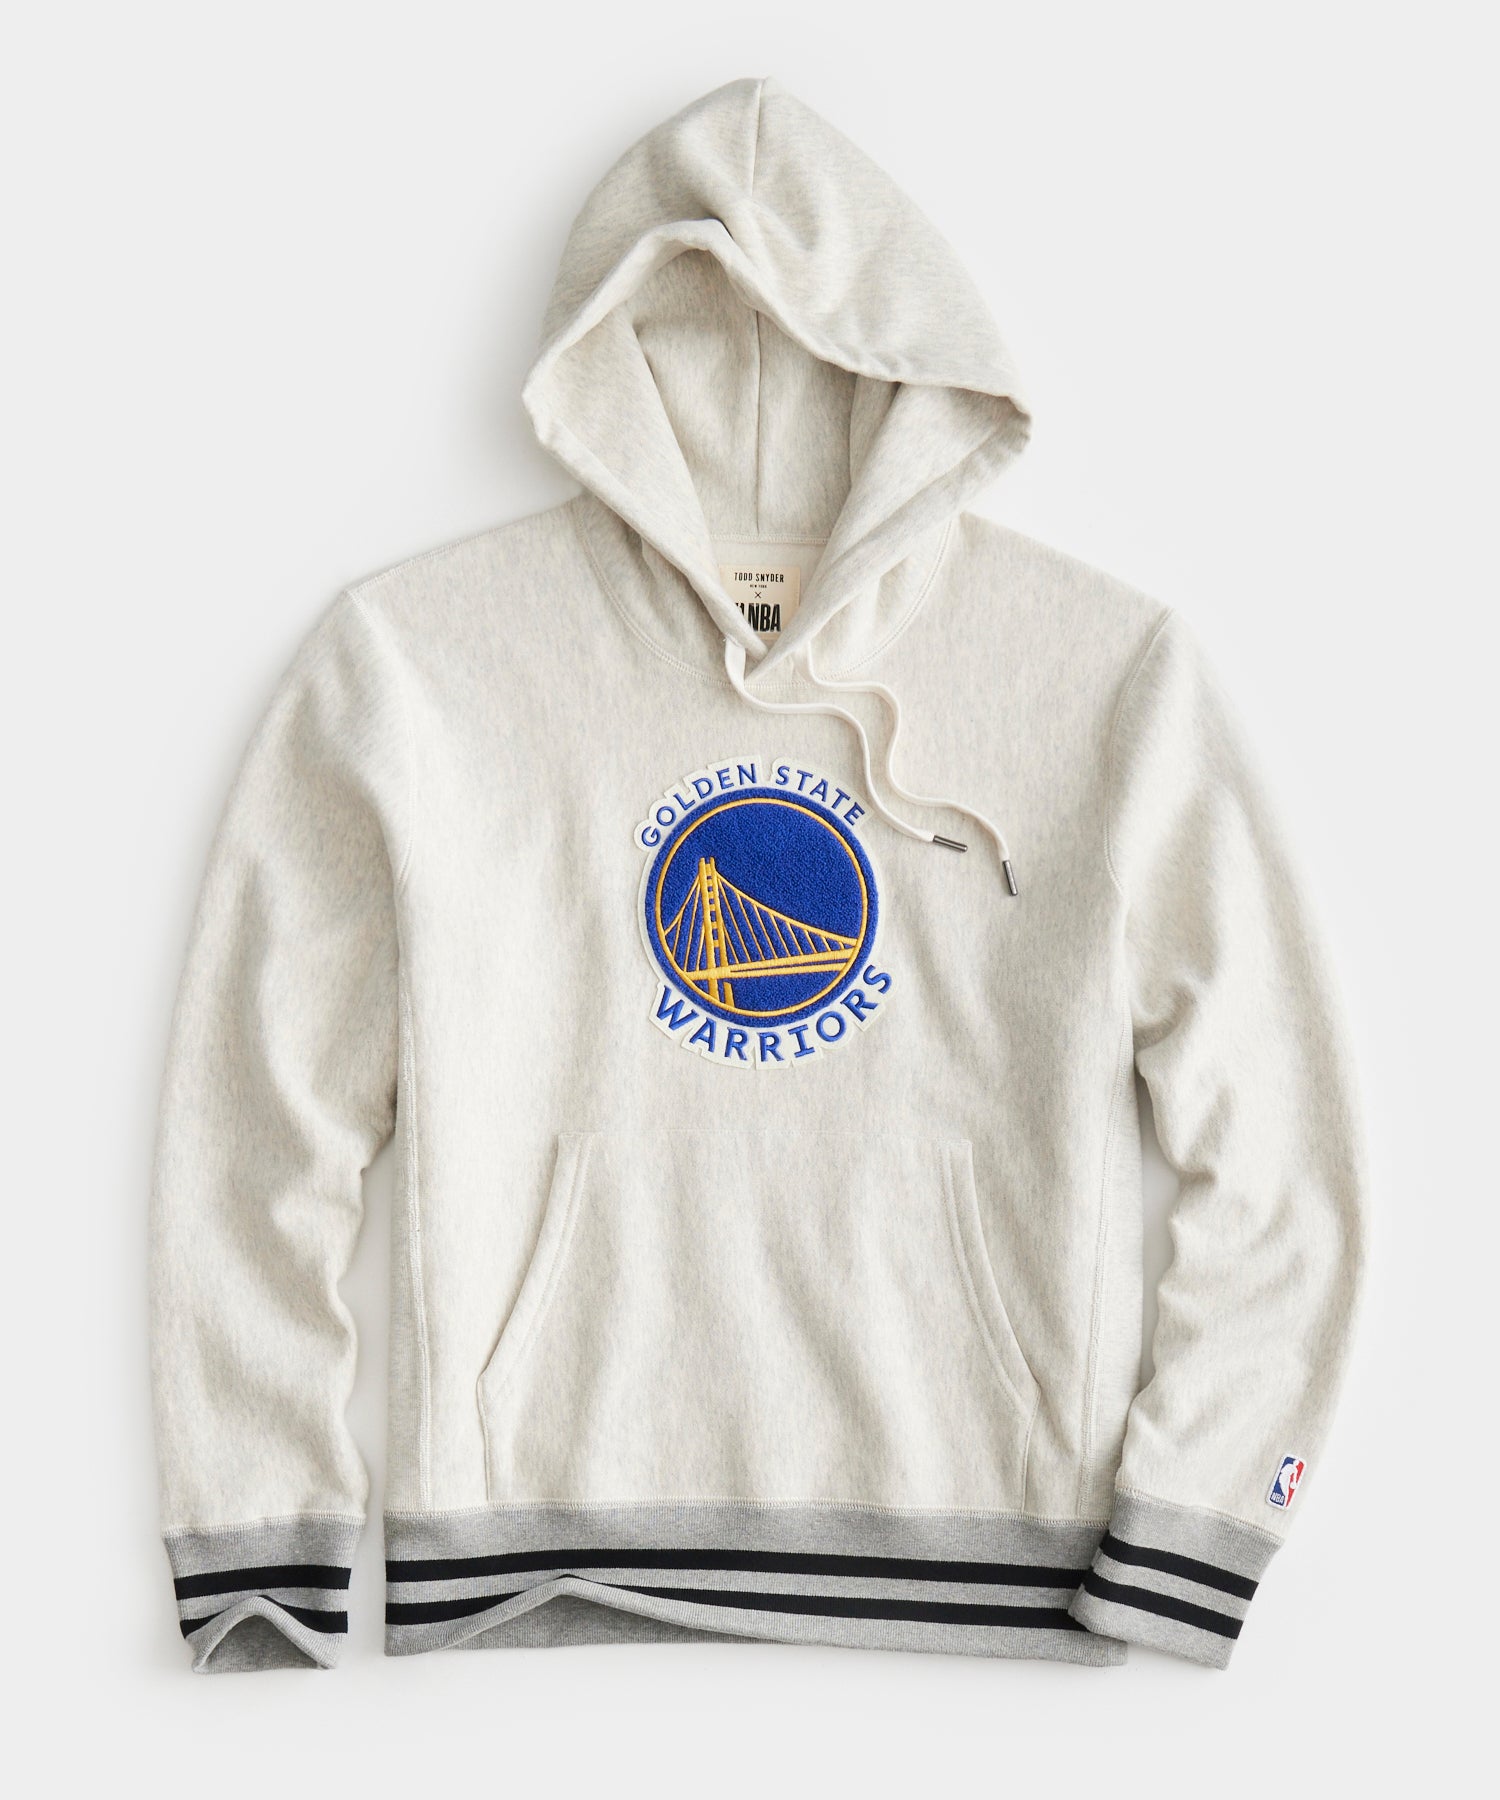 Todd Snyder x NBA Warriors French Terry Hoodie